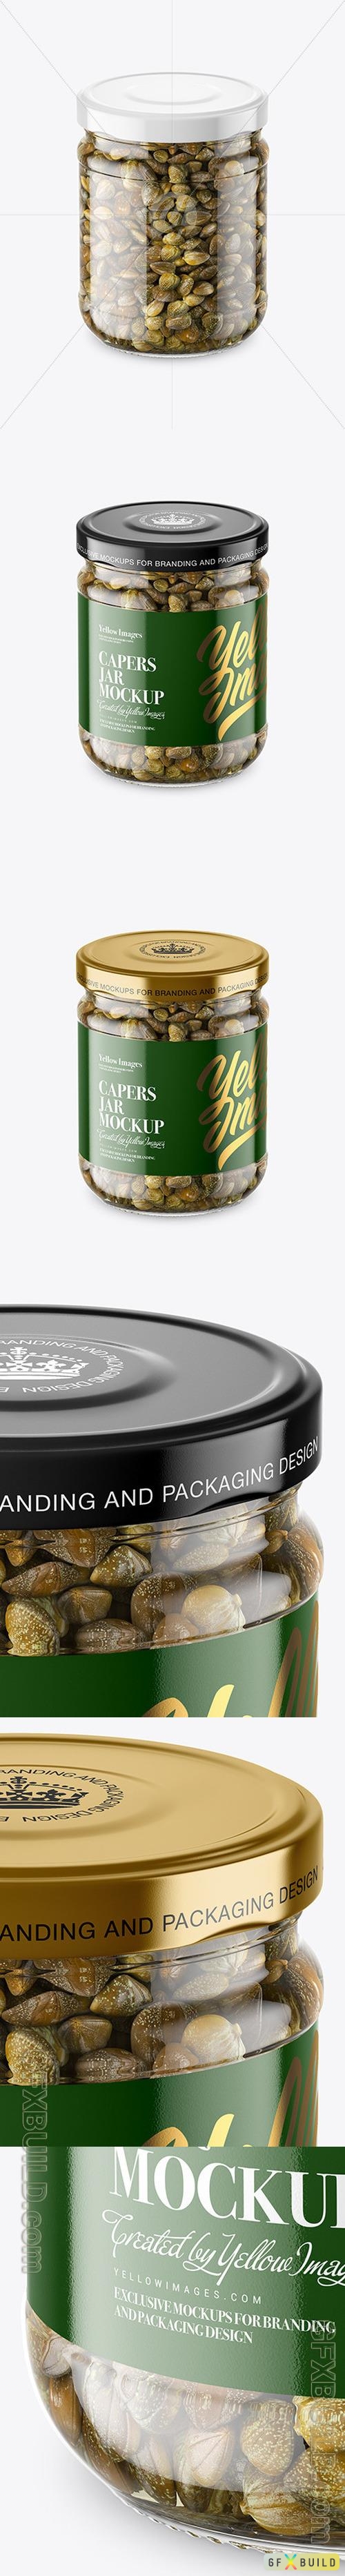 Clear Glass Jar with Capers Mockup 46553